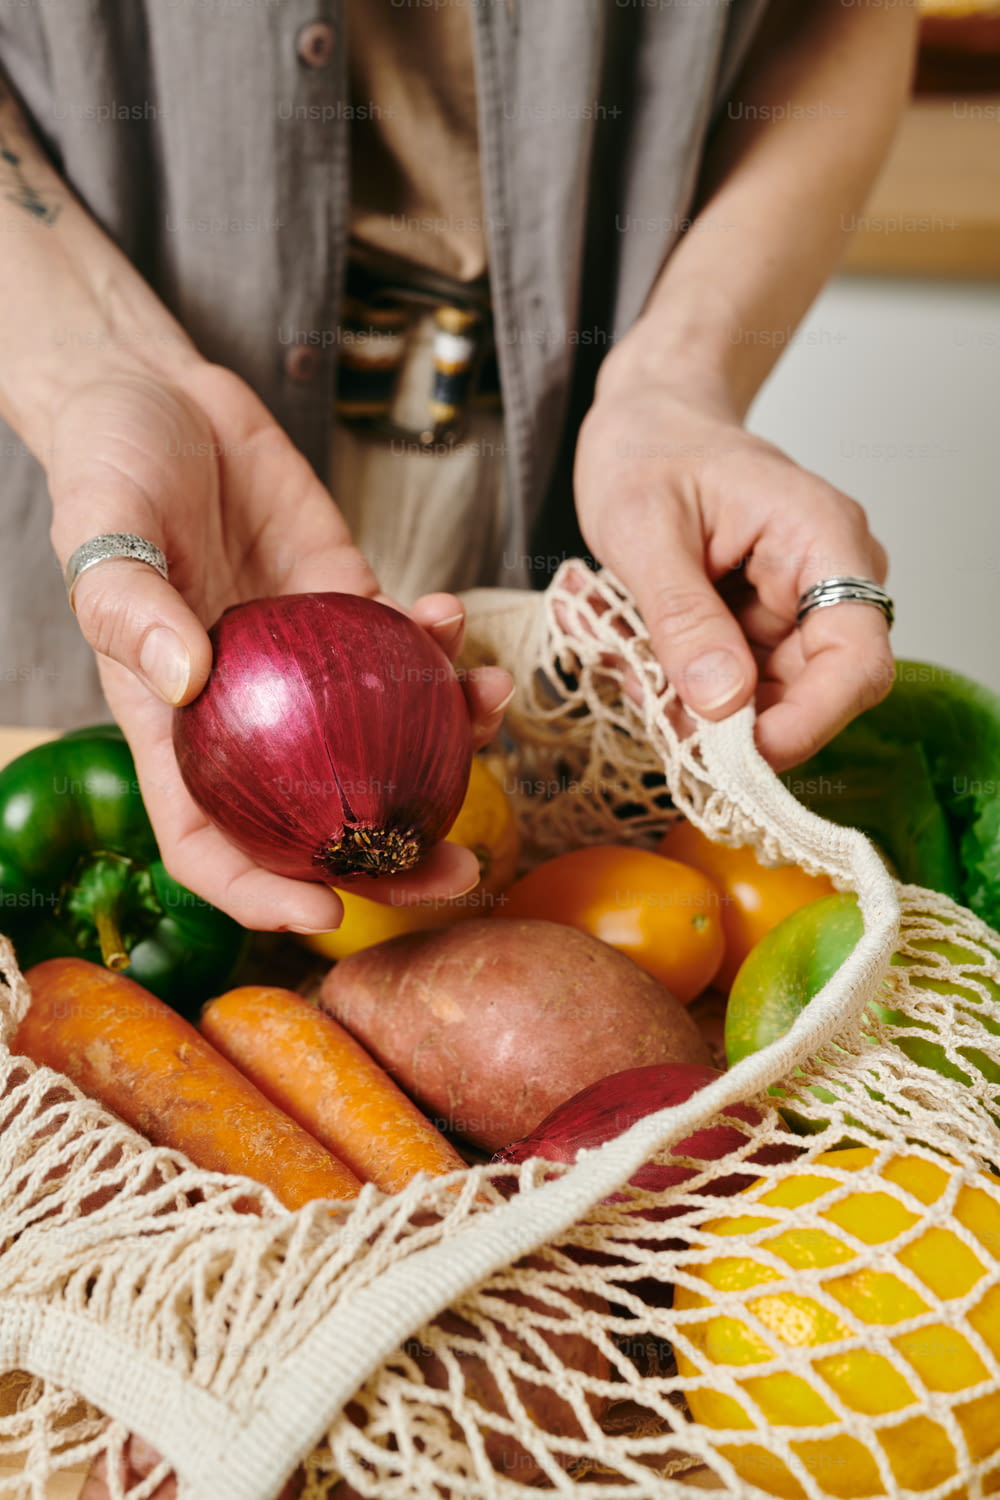 Female vegetarian holding fresh onion over bag with other vegetables